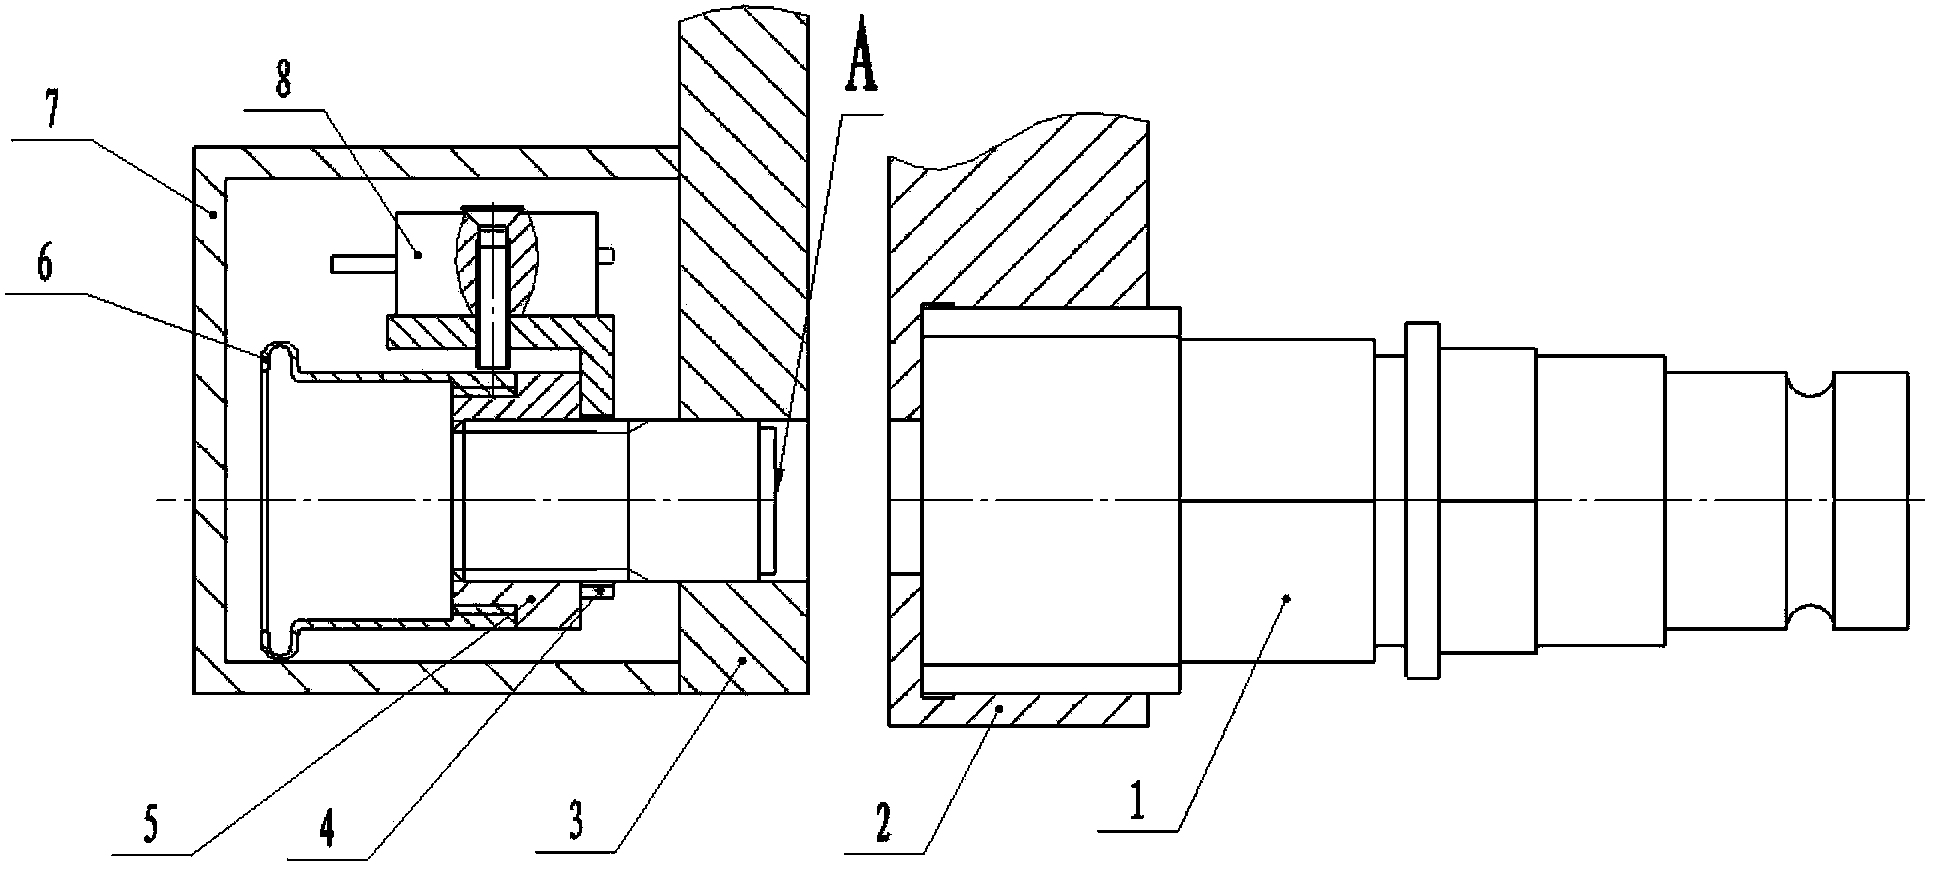 Locking and automatic unlocking mechanism for two-dimensional tracking rotating-tables